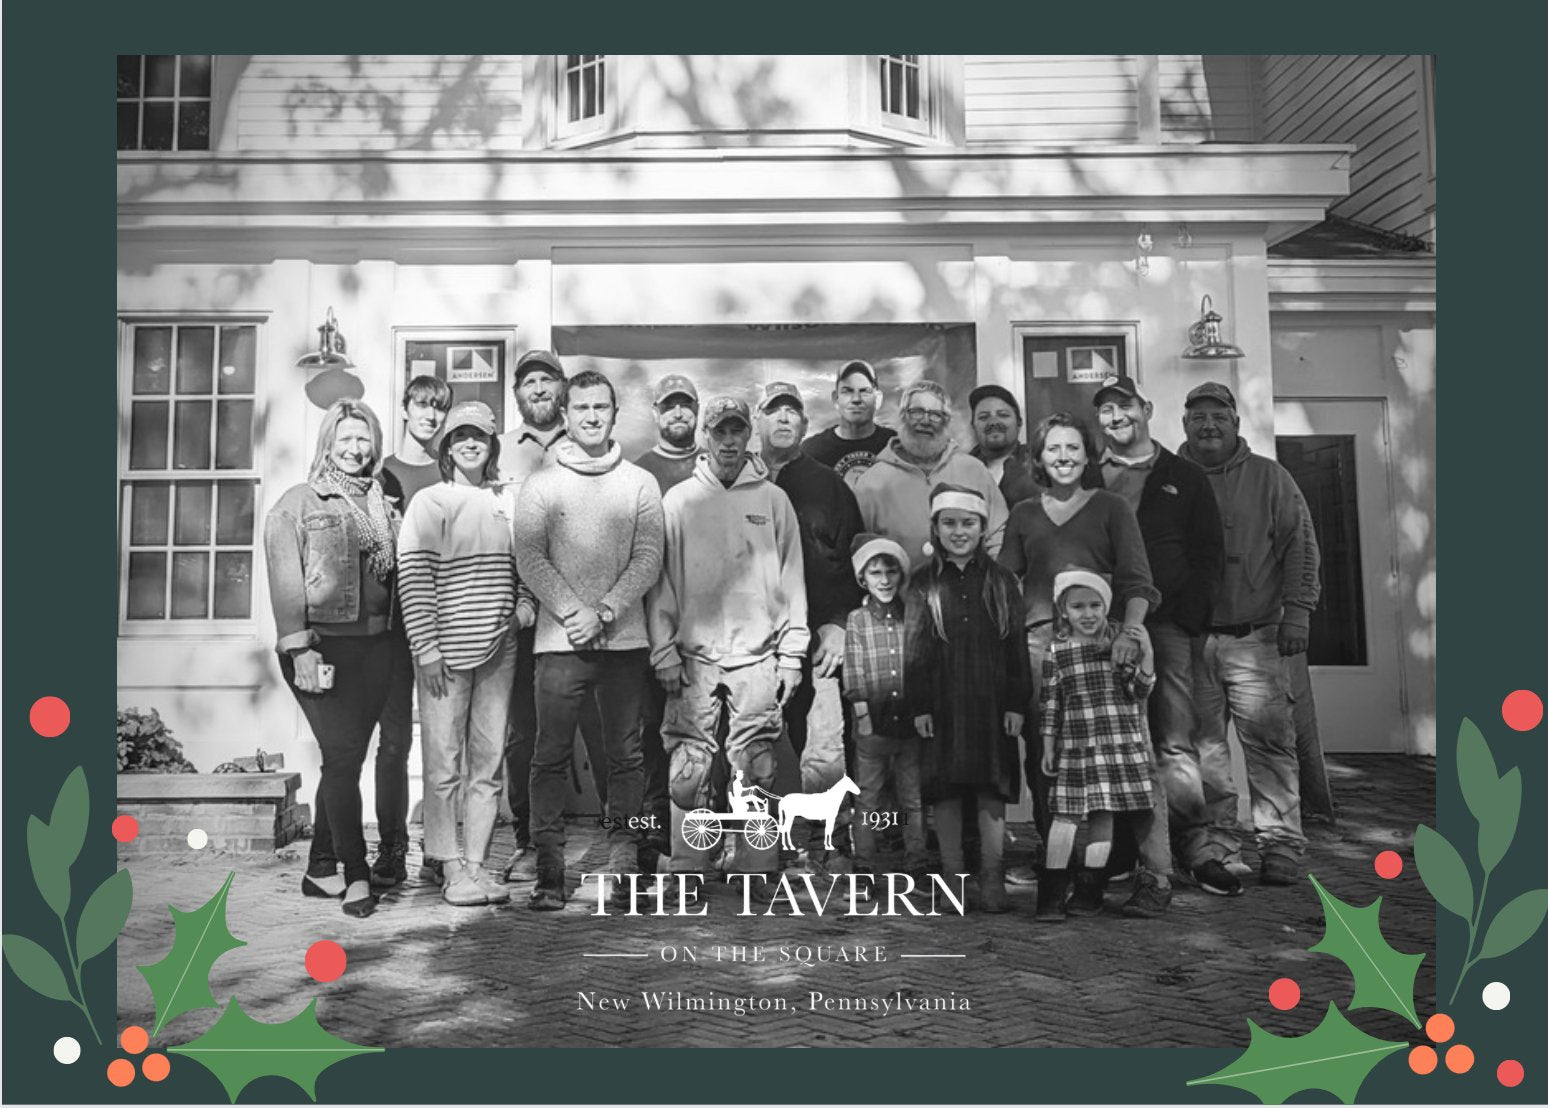 Happy Holidays from the hardworking Tavern Team!